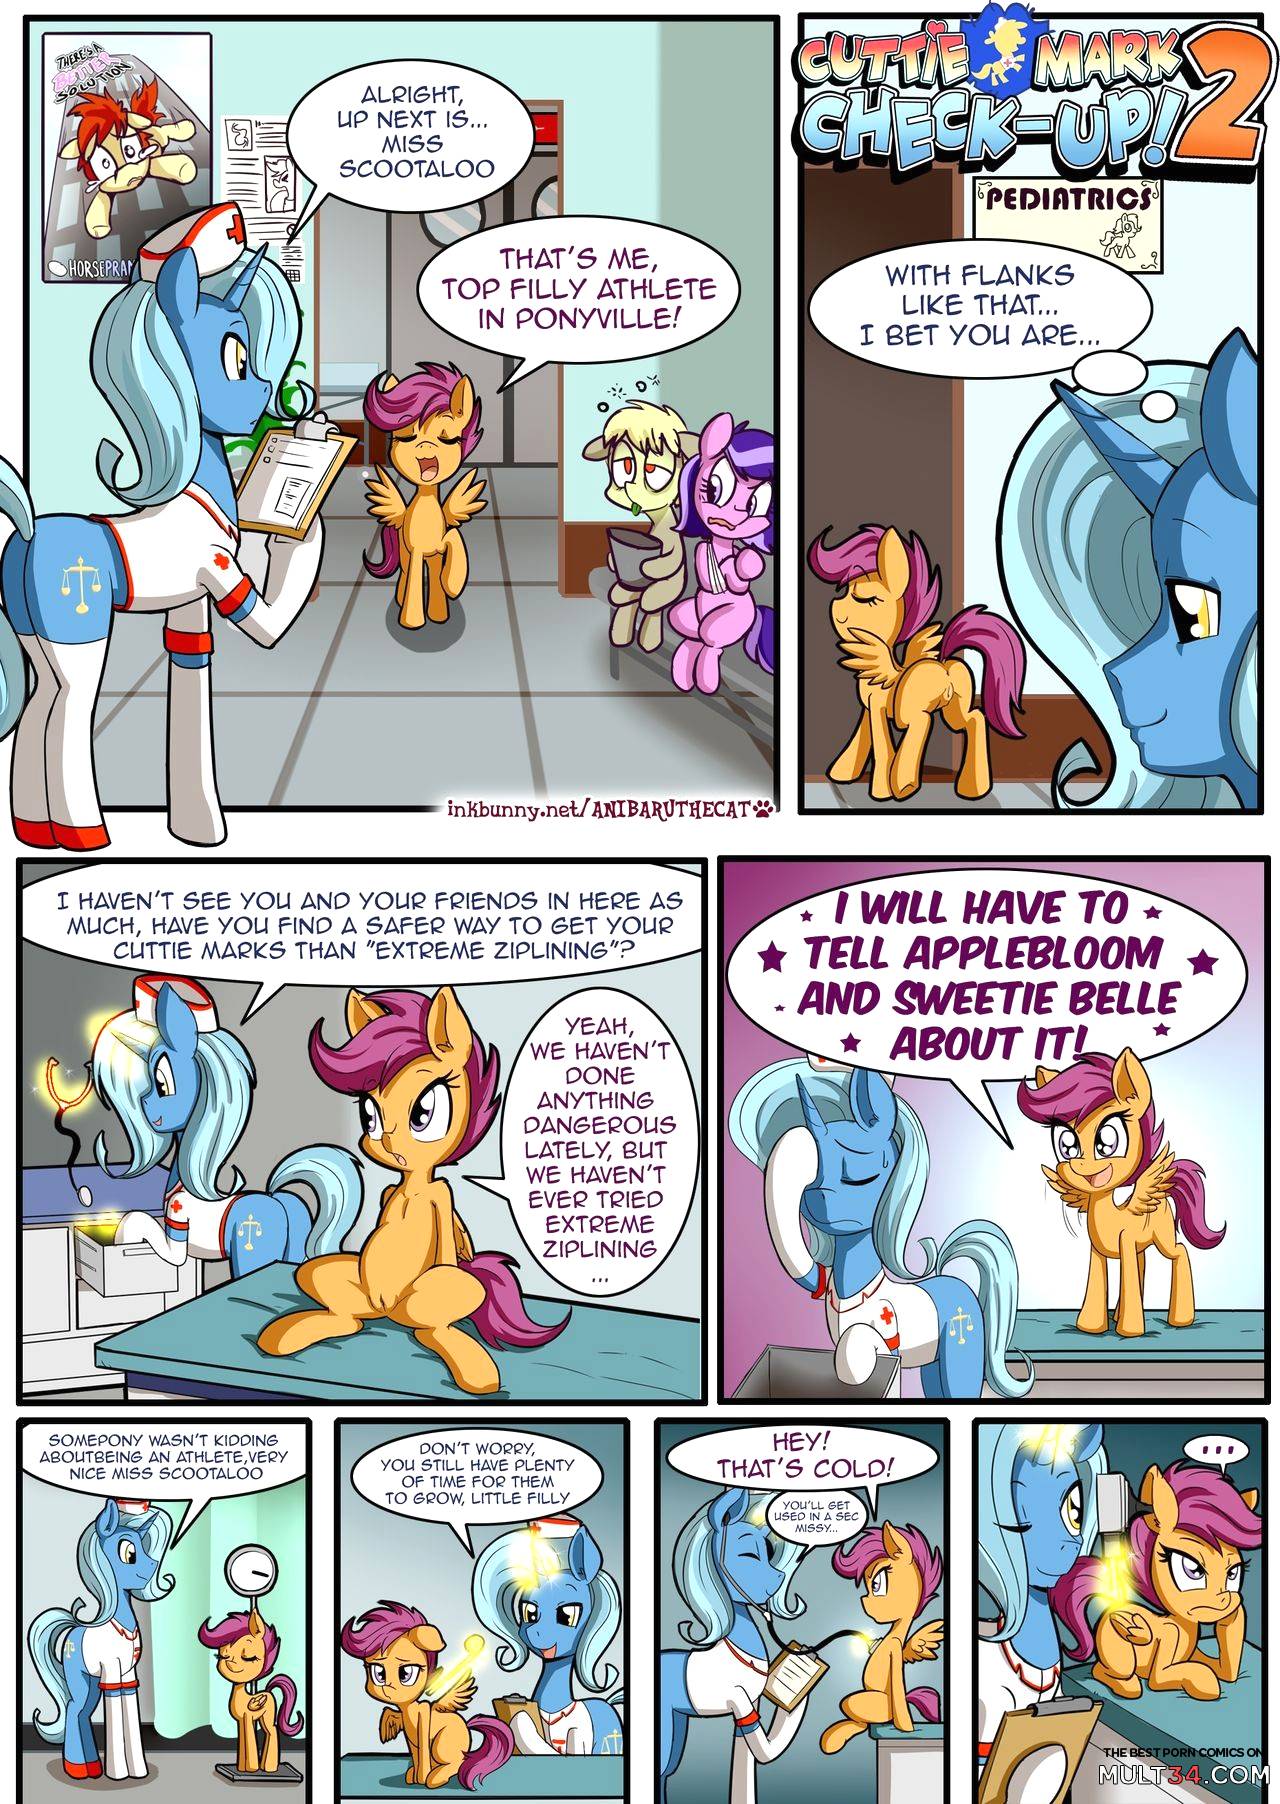 Cutie Mark Check-Up! 2 page 3